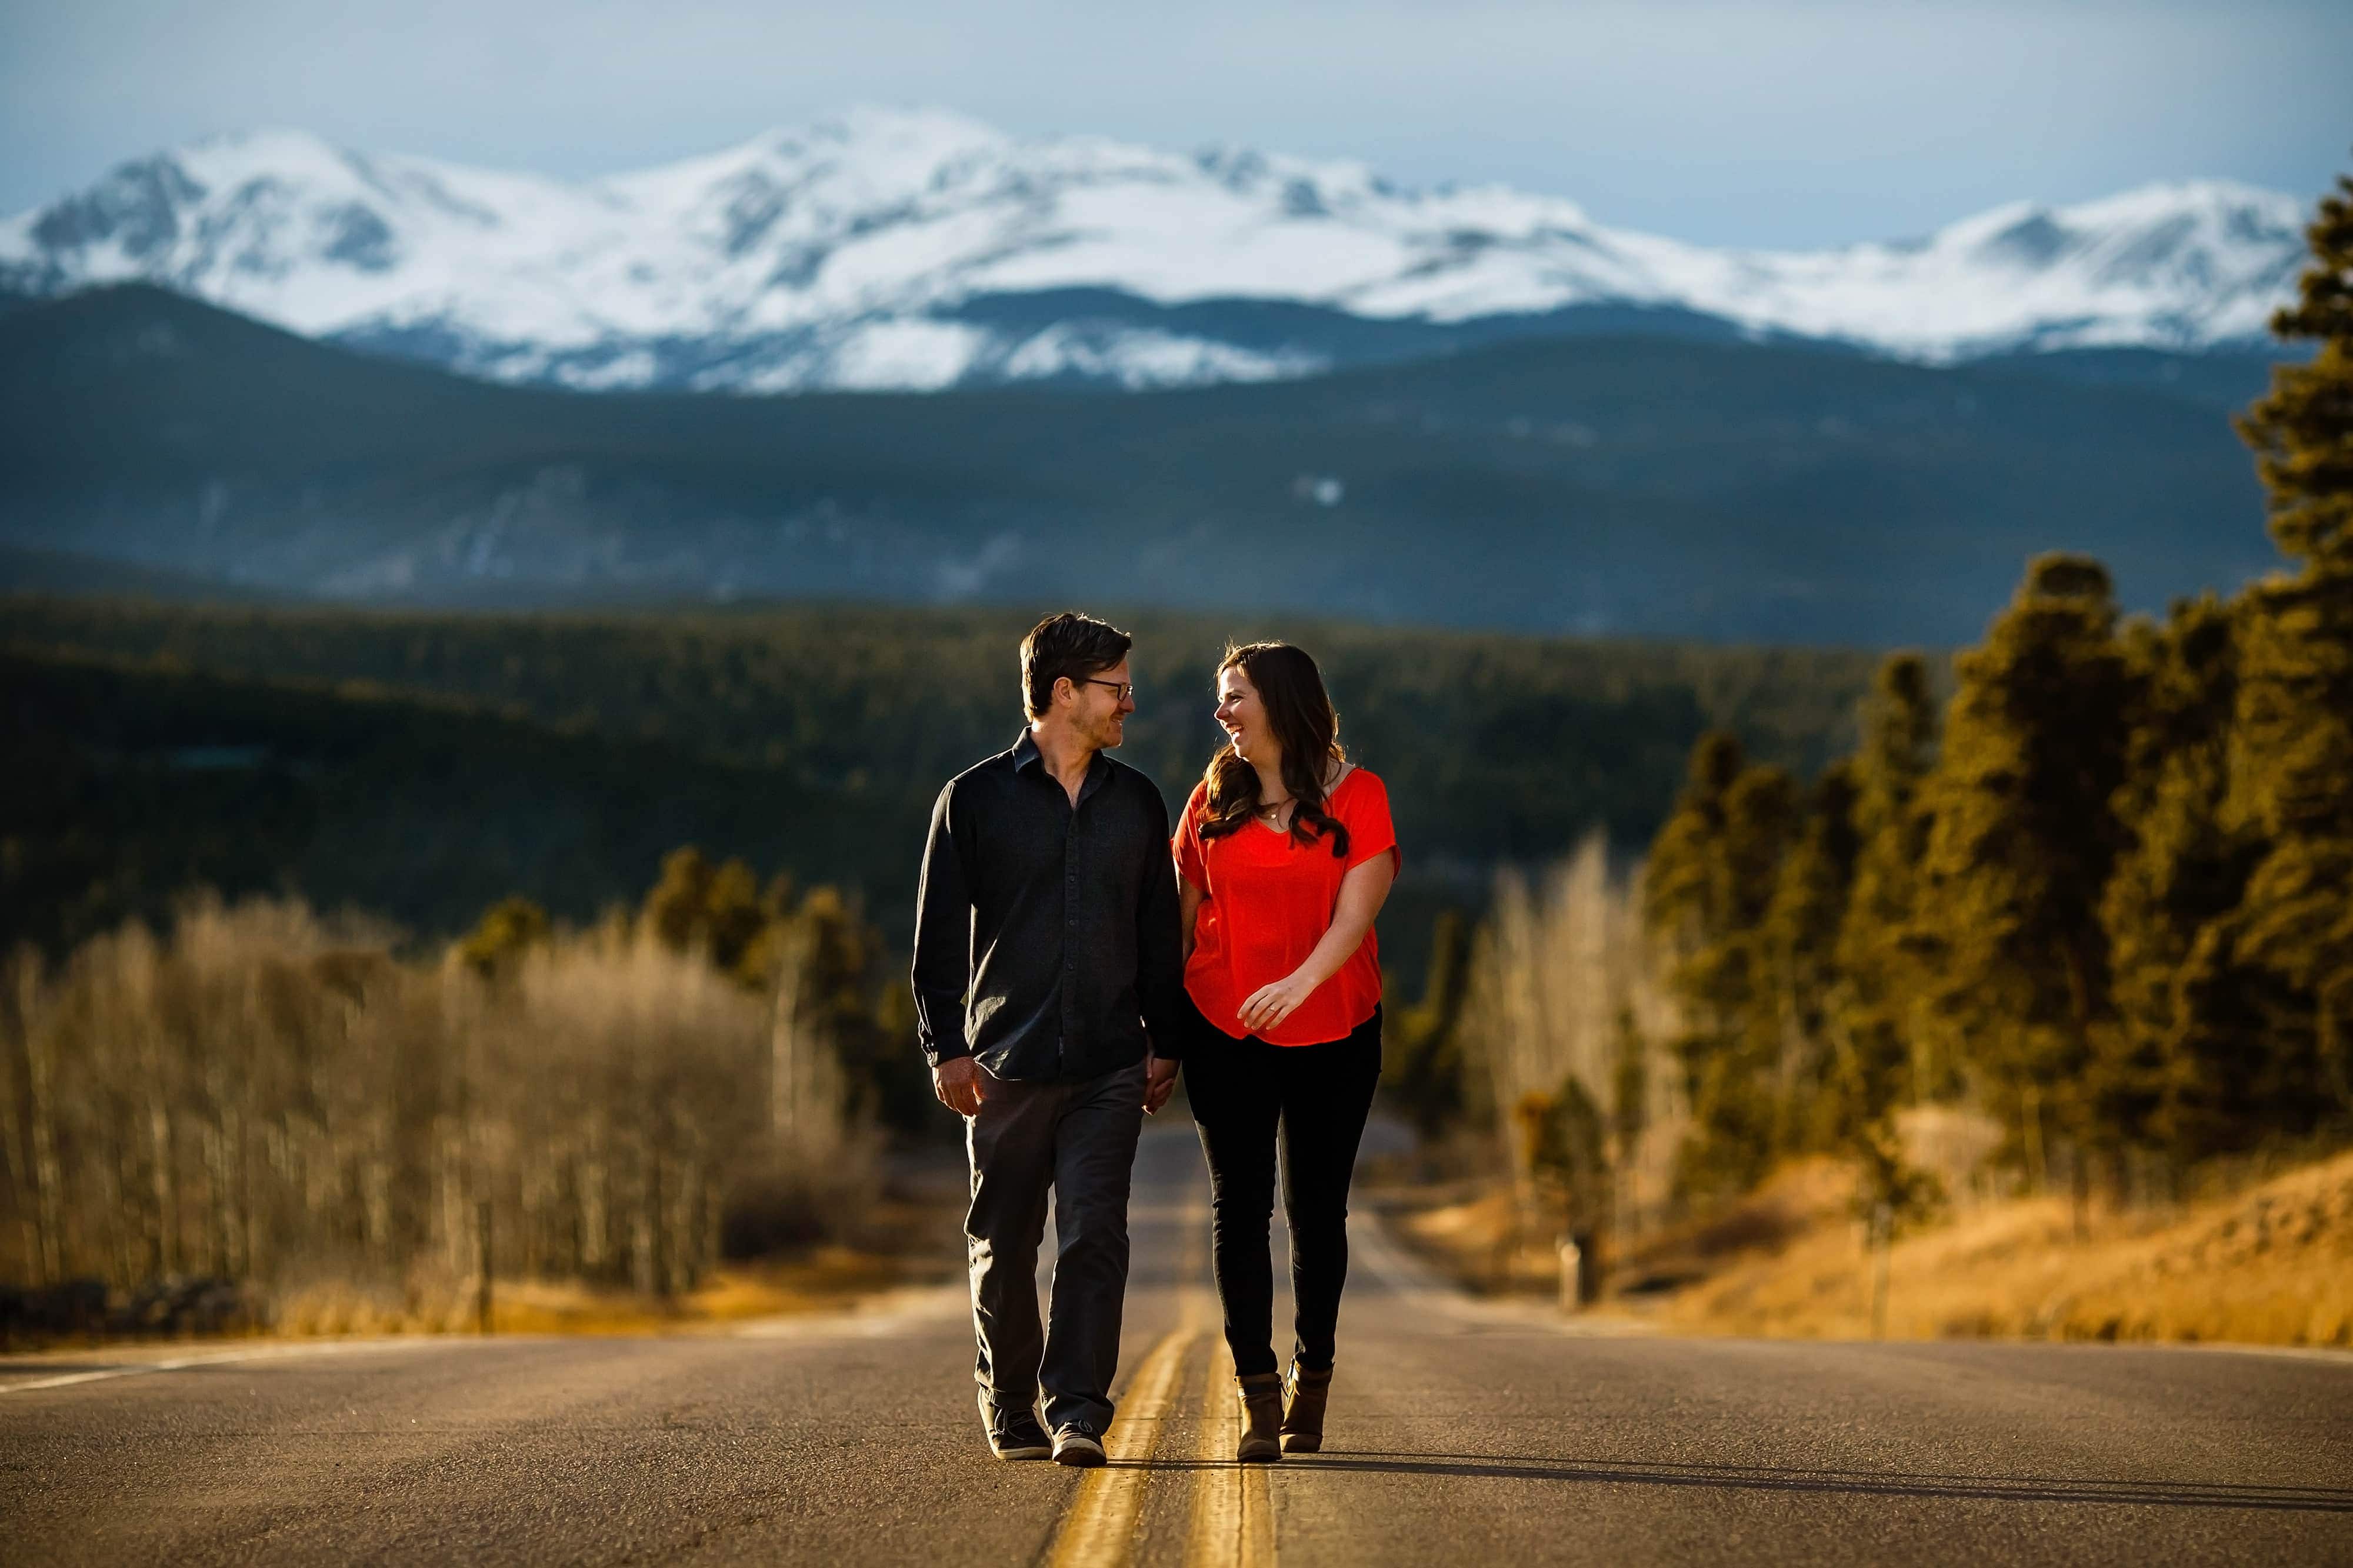 Brian and Kate hold hands and walk along Colorado highway 119 in Black Hawk, Colorado with the snow capped mountains seen in the background during their Spring Golden Gate Canyon State Park engagement